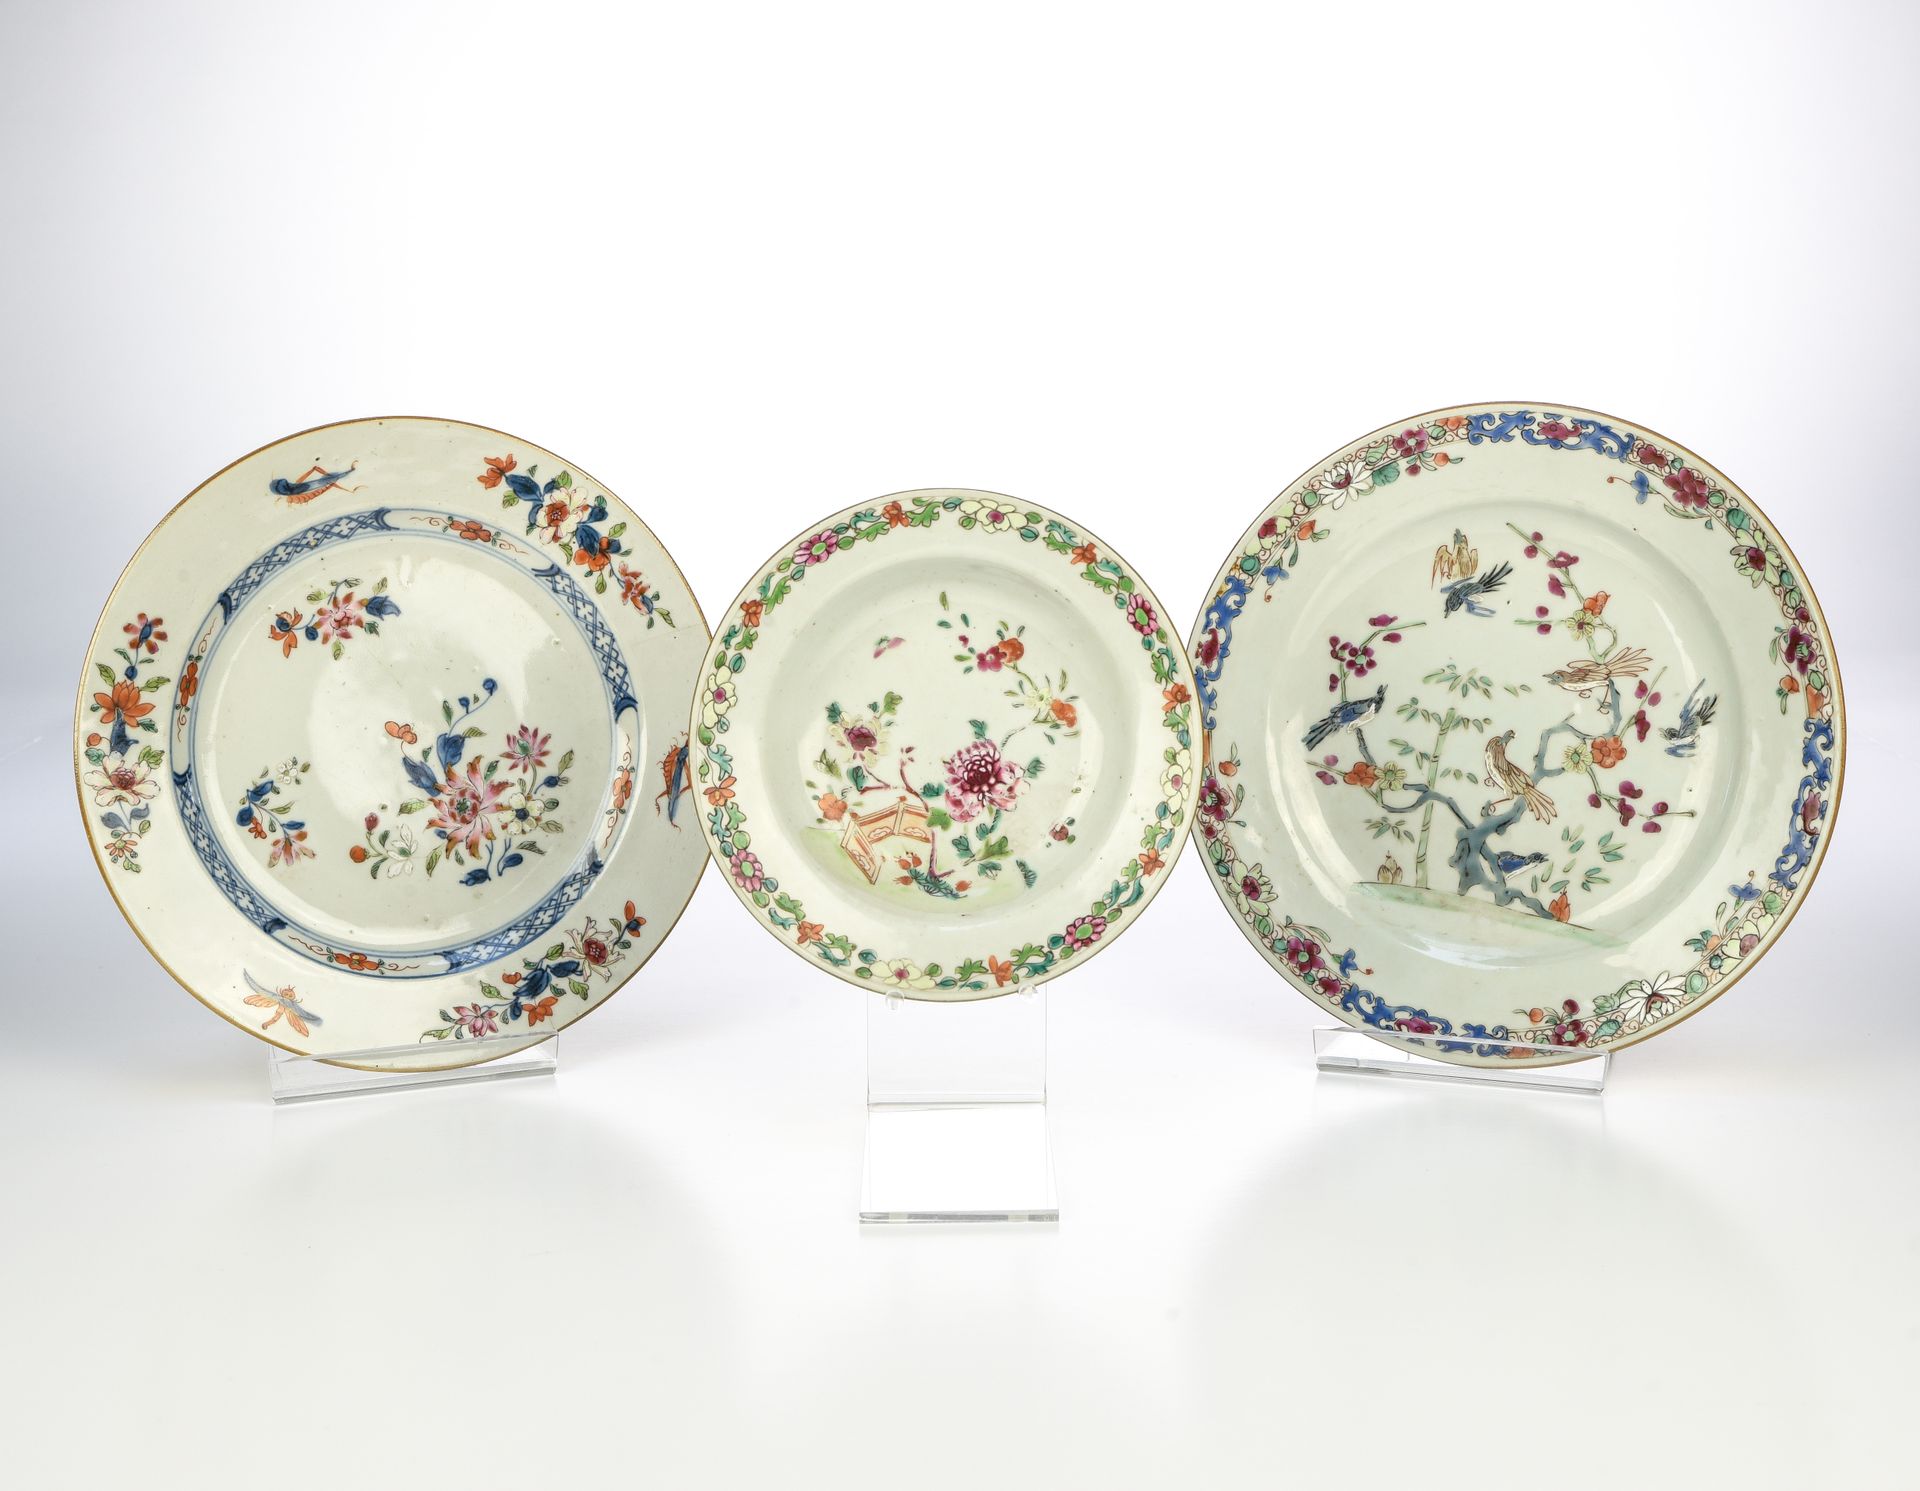 Null Two plates and a small bowl

CHINA, INDIA COMPANY - QIANLONG ERA (1736-1795&hellip;